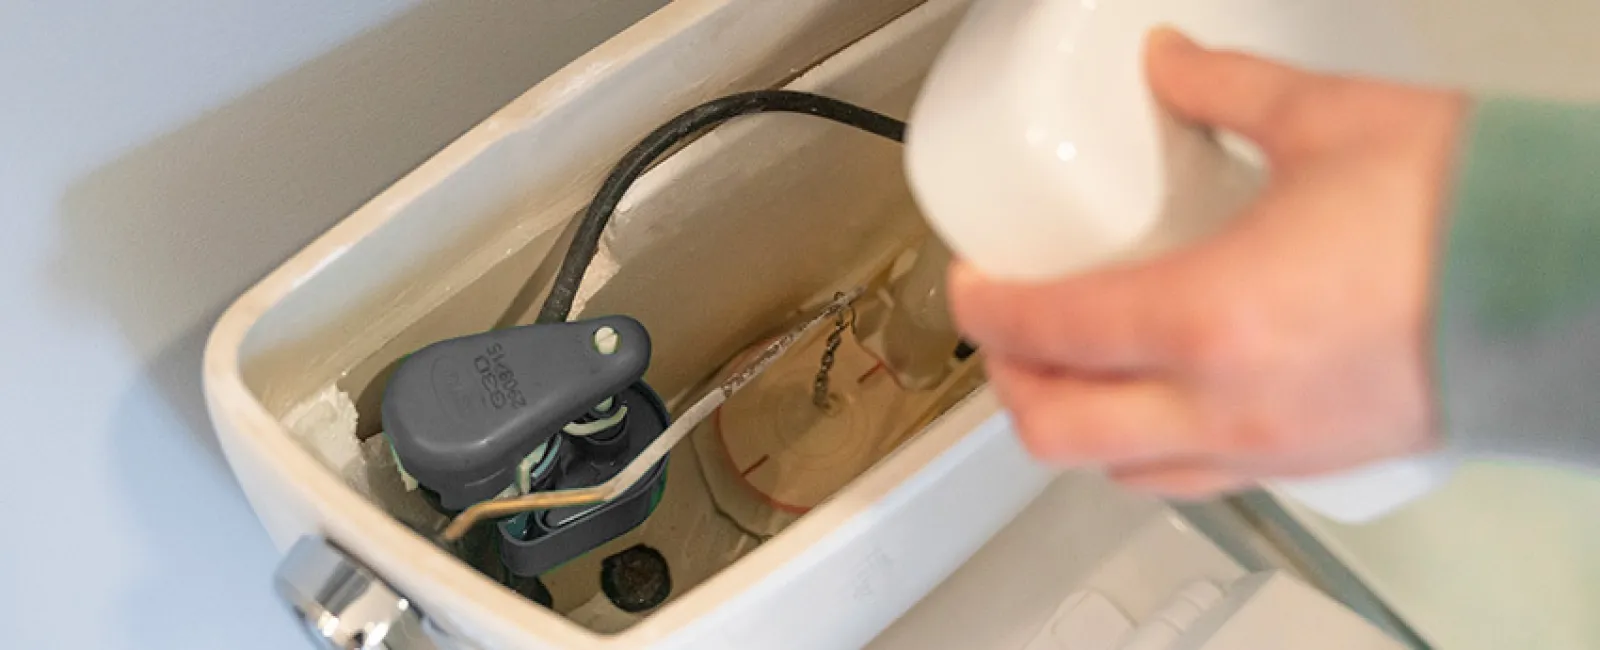 Why Is There No Water in My Toilet Tank?